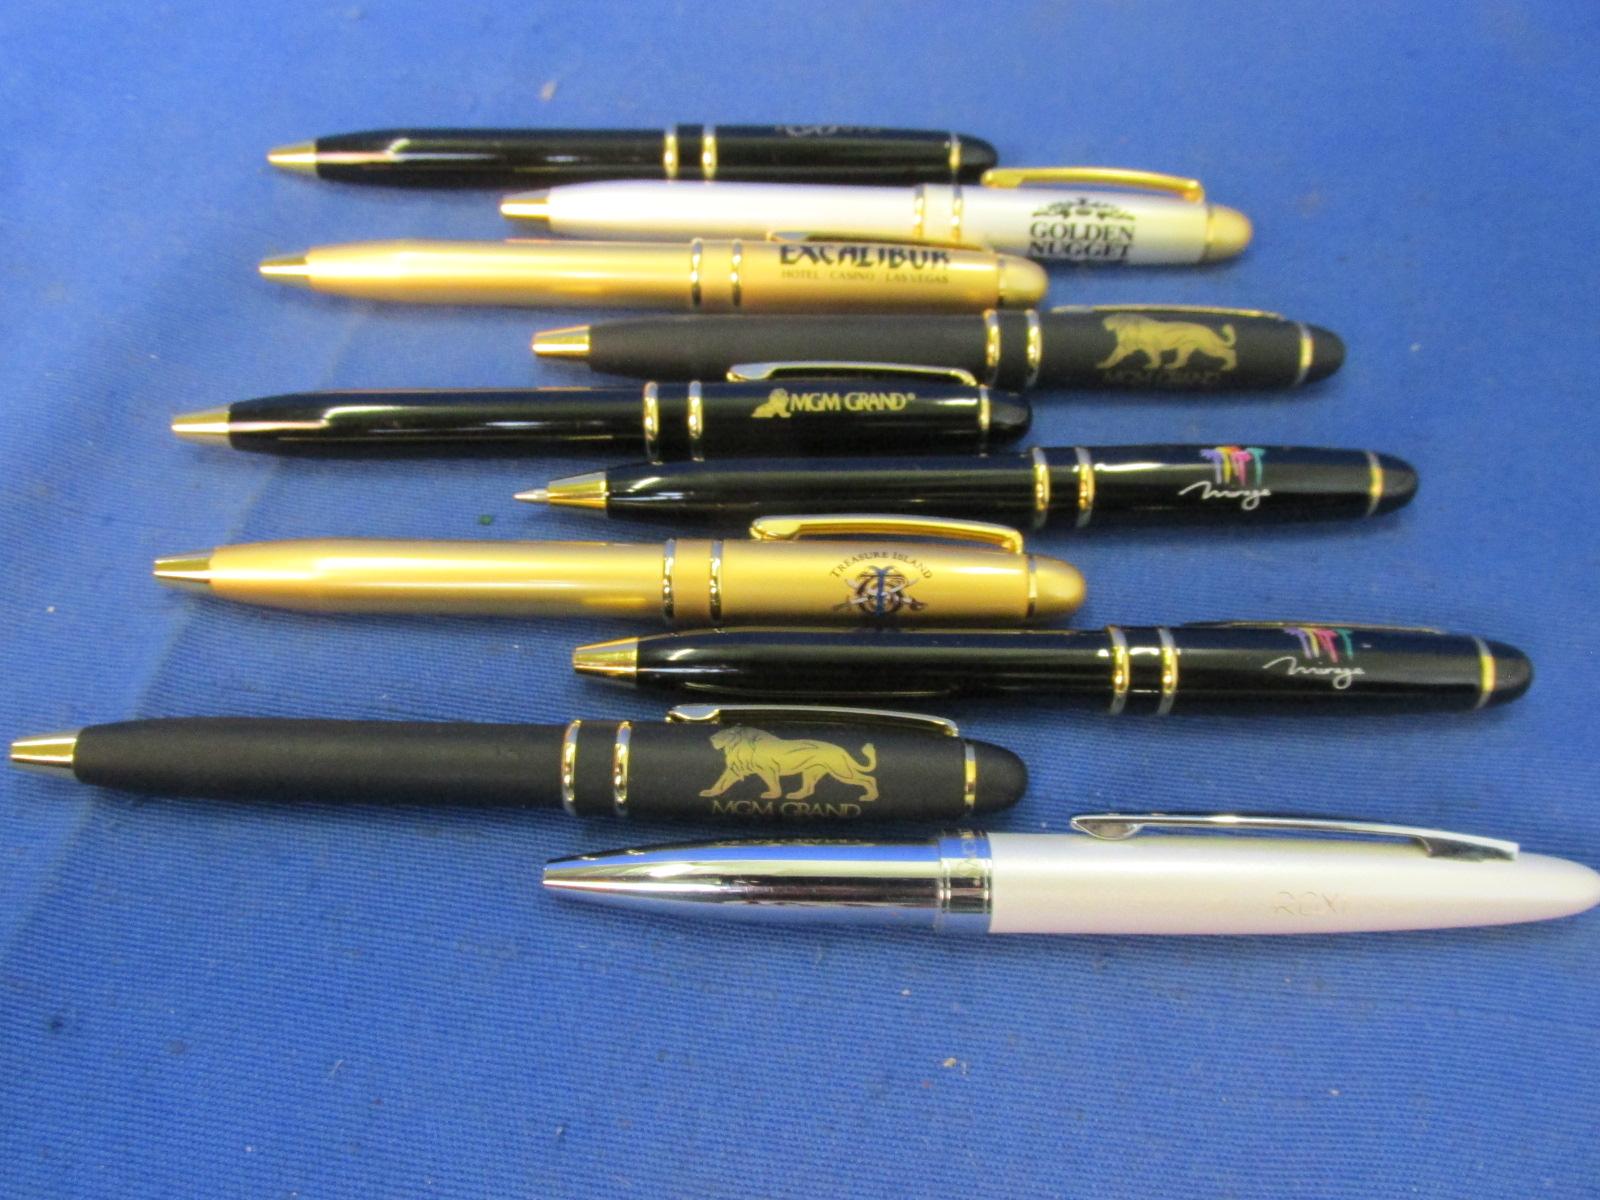 10 Fancy Ball-point Pens Advertising Casinos (not tested)